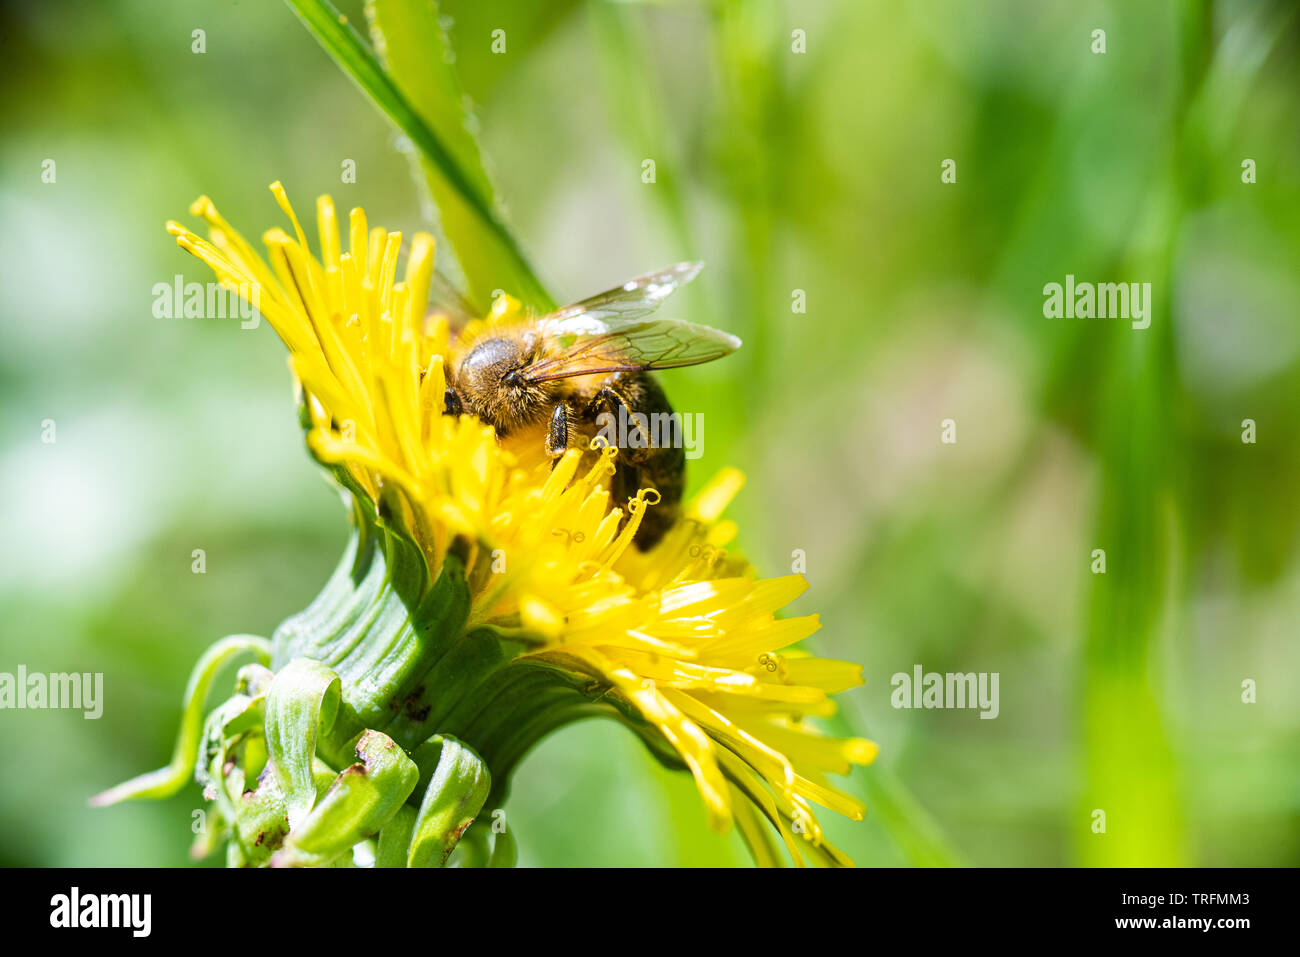 Honey bee gathering nectar from a dandelion. Stock Photo